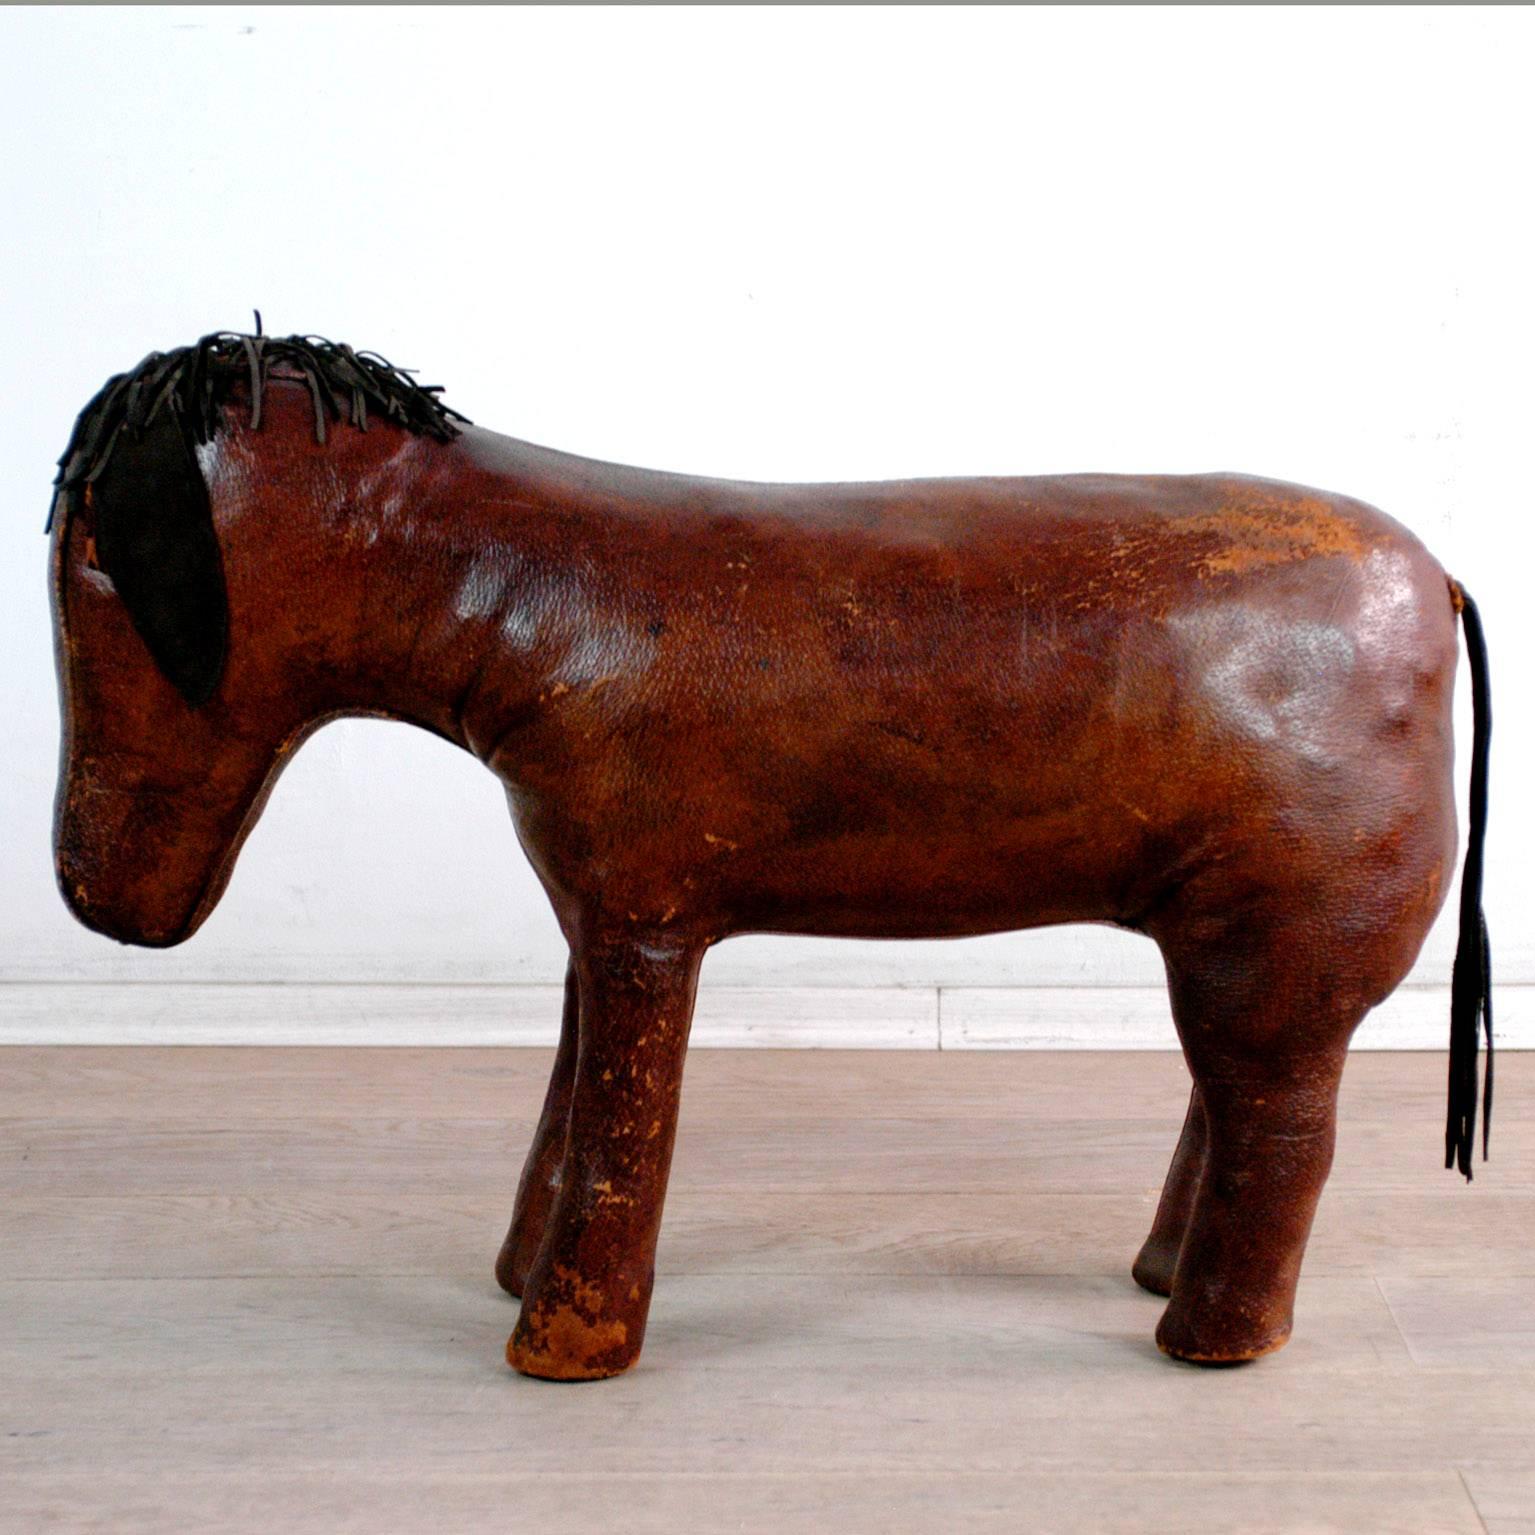 Vintage leather donkey as stool by Abercrombie & Fitch from the 1960s.